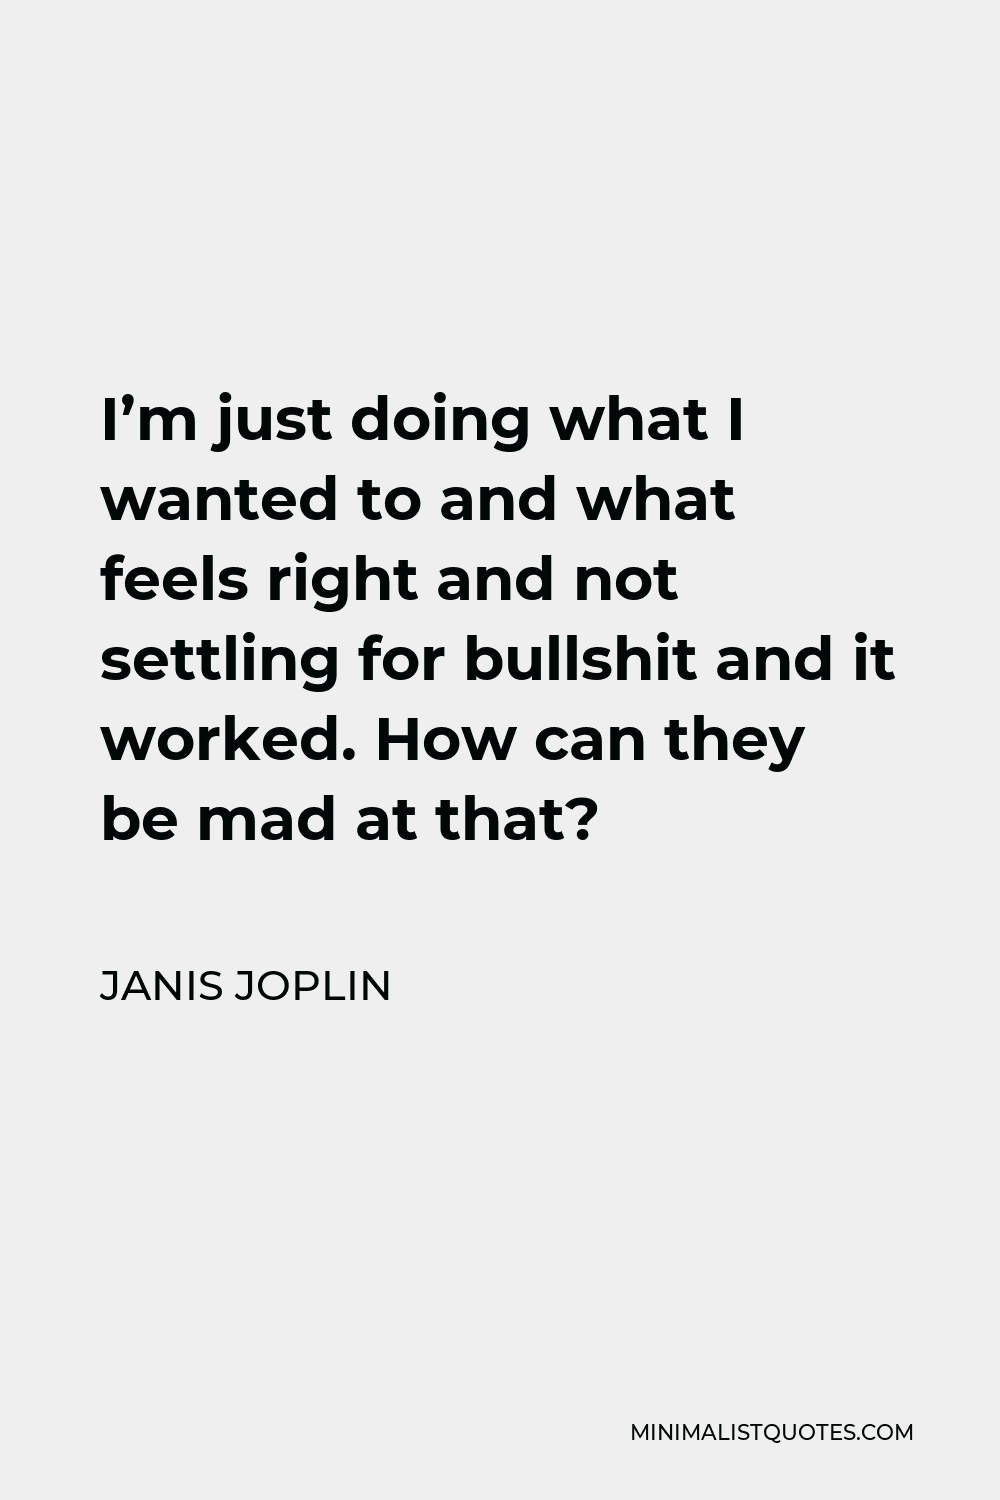 Janis Joplin Quote - I’m just doing what I wanted to and what feels right and not settling for bullshit and it worked. How can they be mad at that?